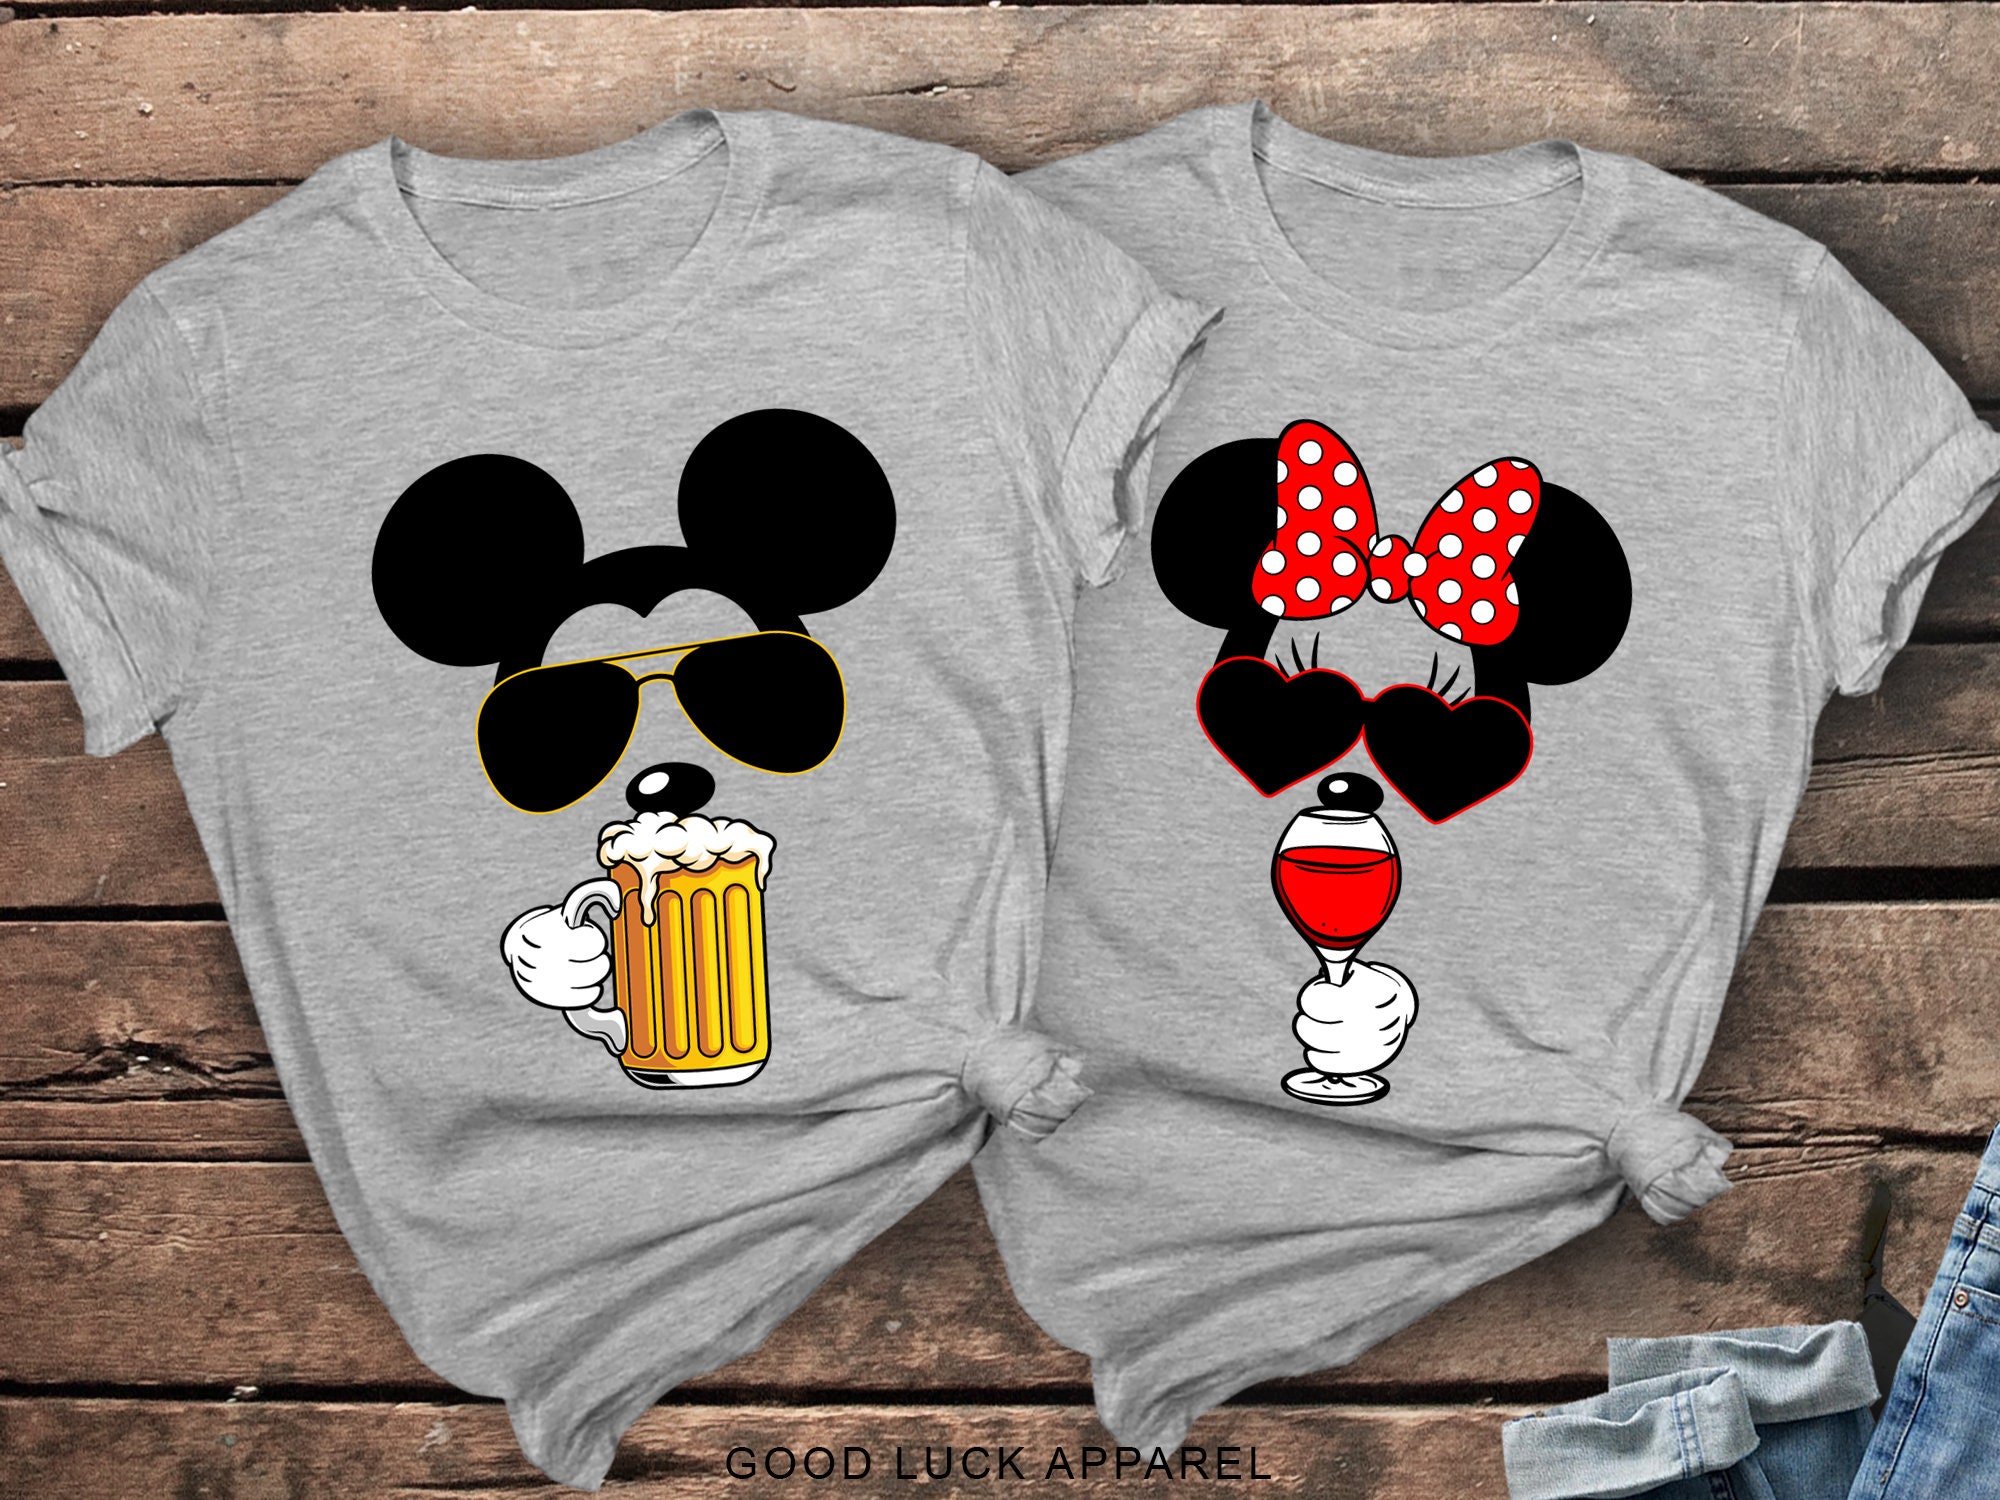 Discover Mickey and Minnie Drinking around Shirts, Drinking around the world Epcot shirts